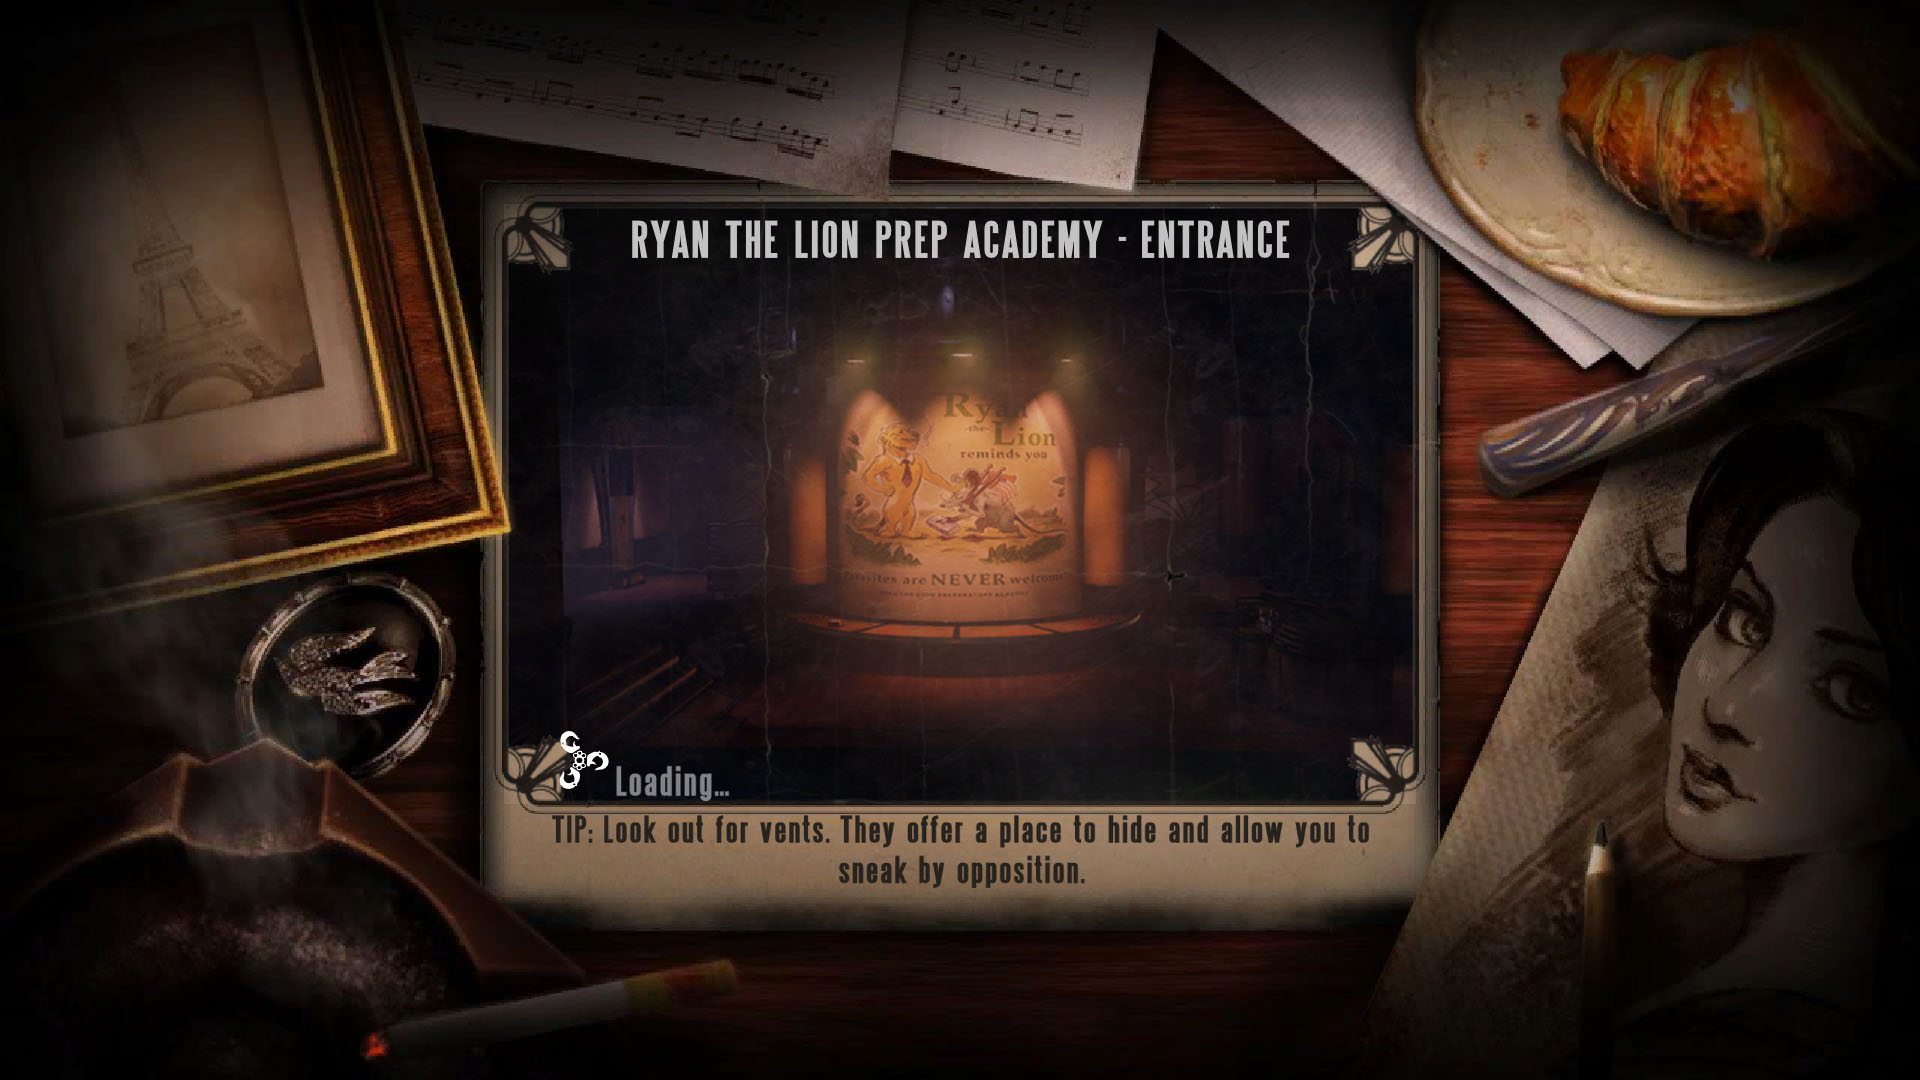 Playing through BioShock Infinite's compelling Burial at Sea - Polygon